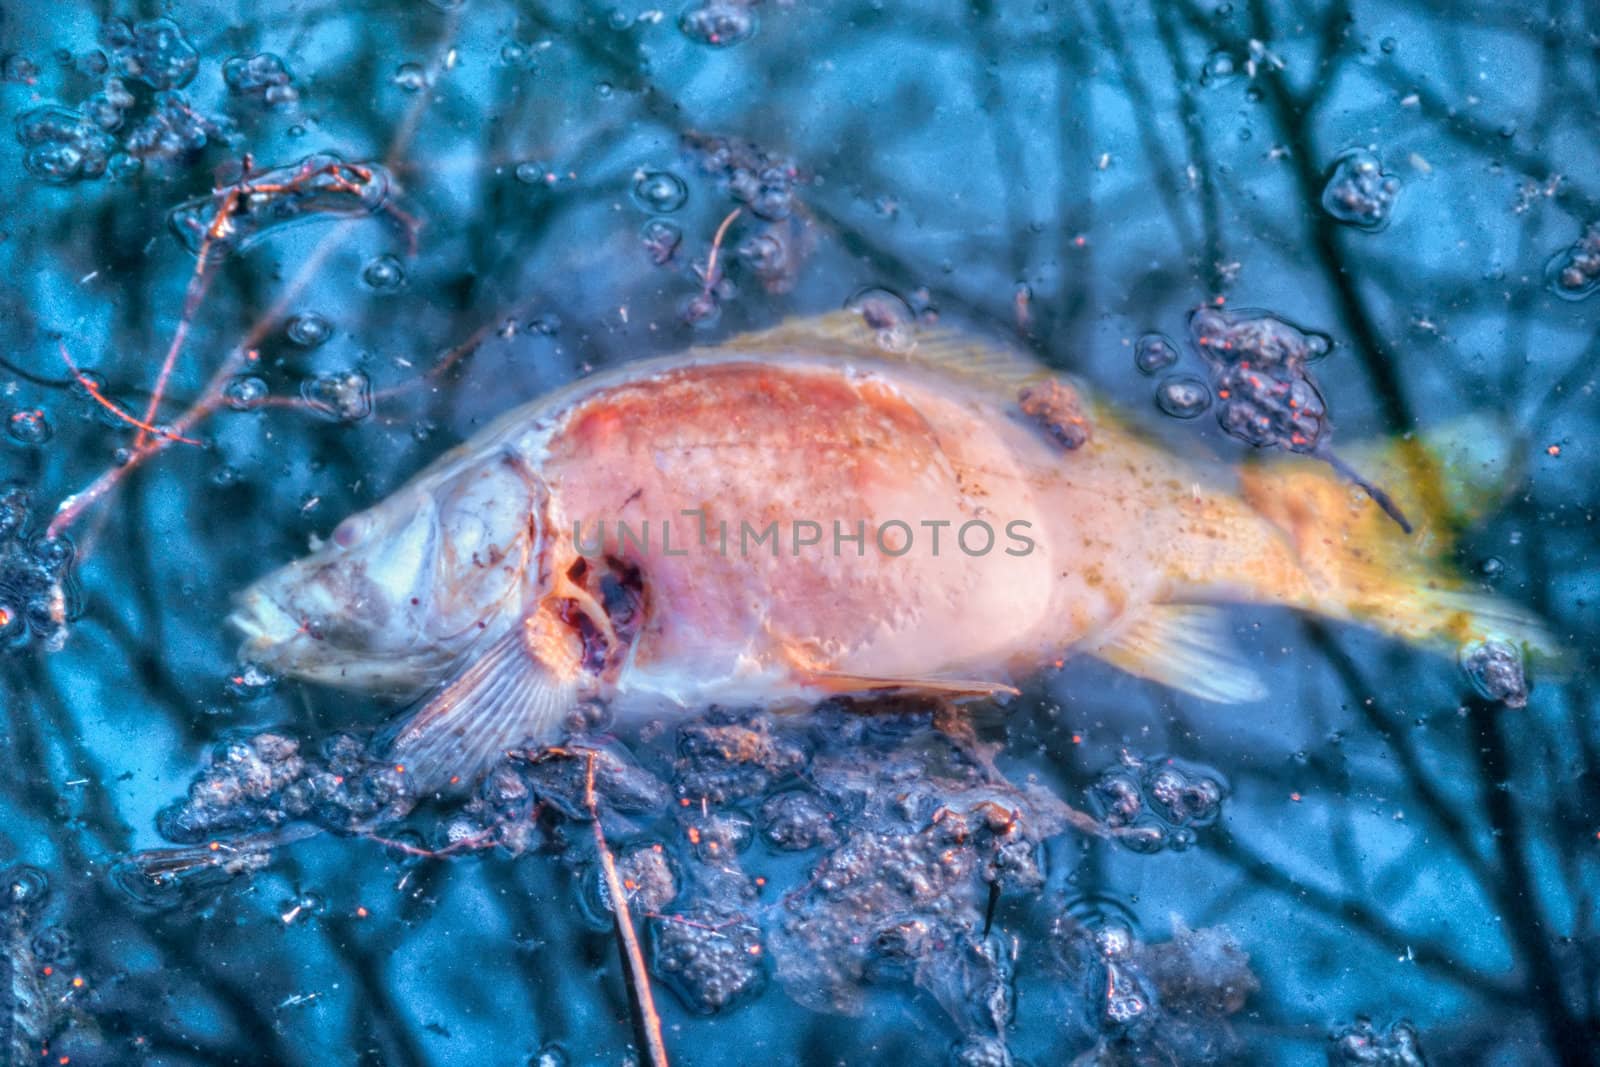 Dead Carp decays on surface of polluted water by PiLens